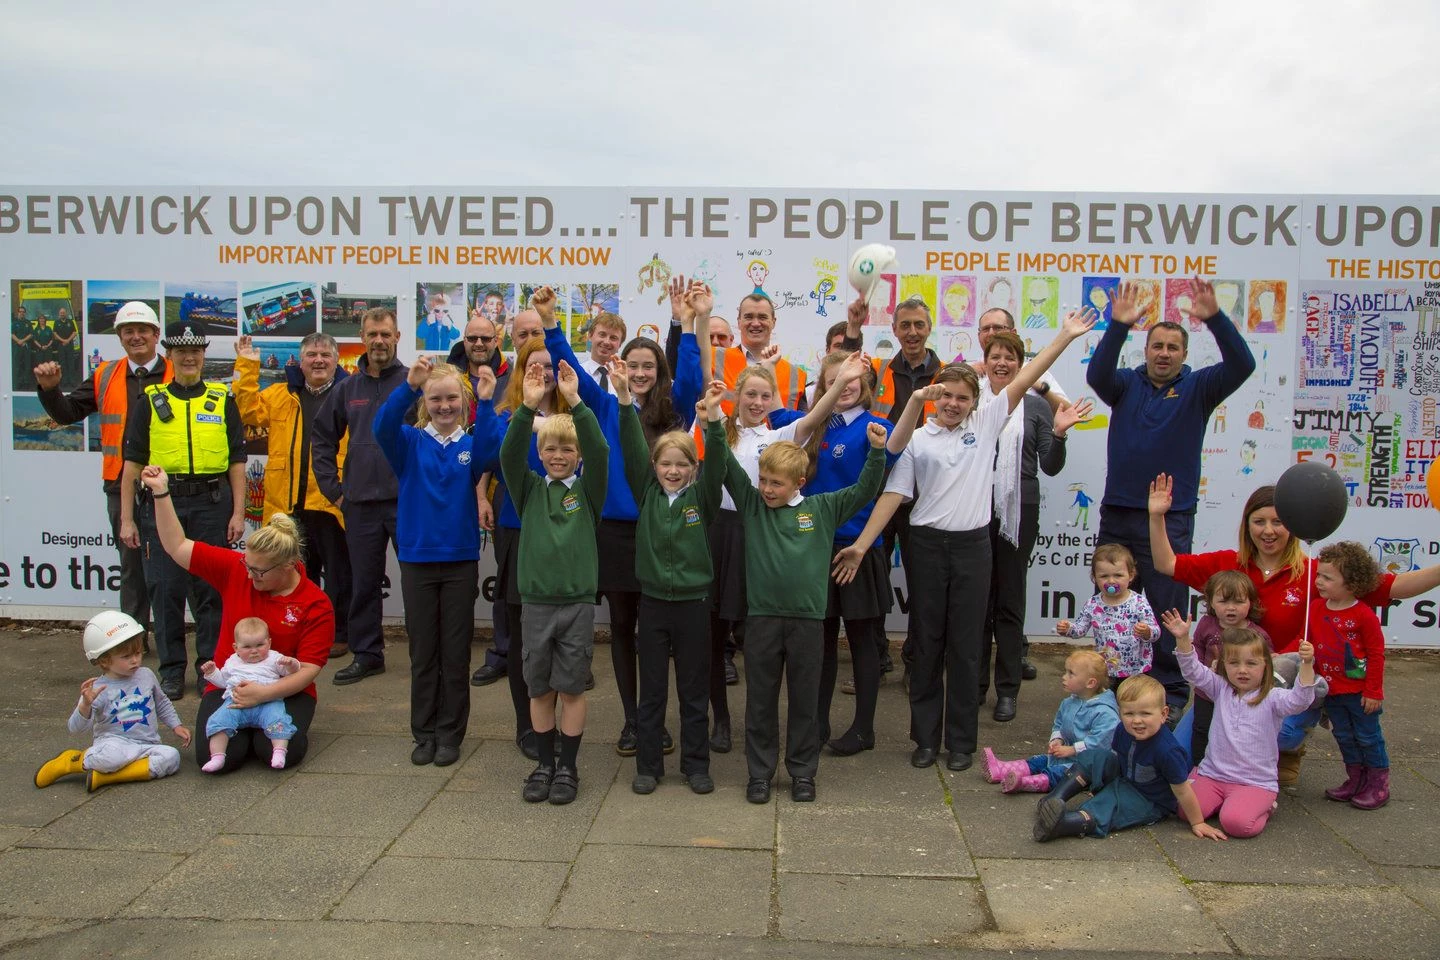 Community project unveiled in Berwick